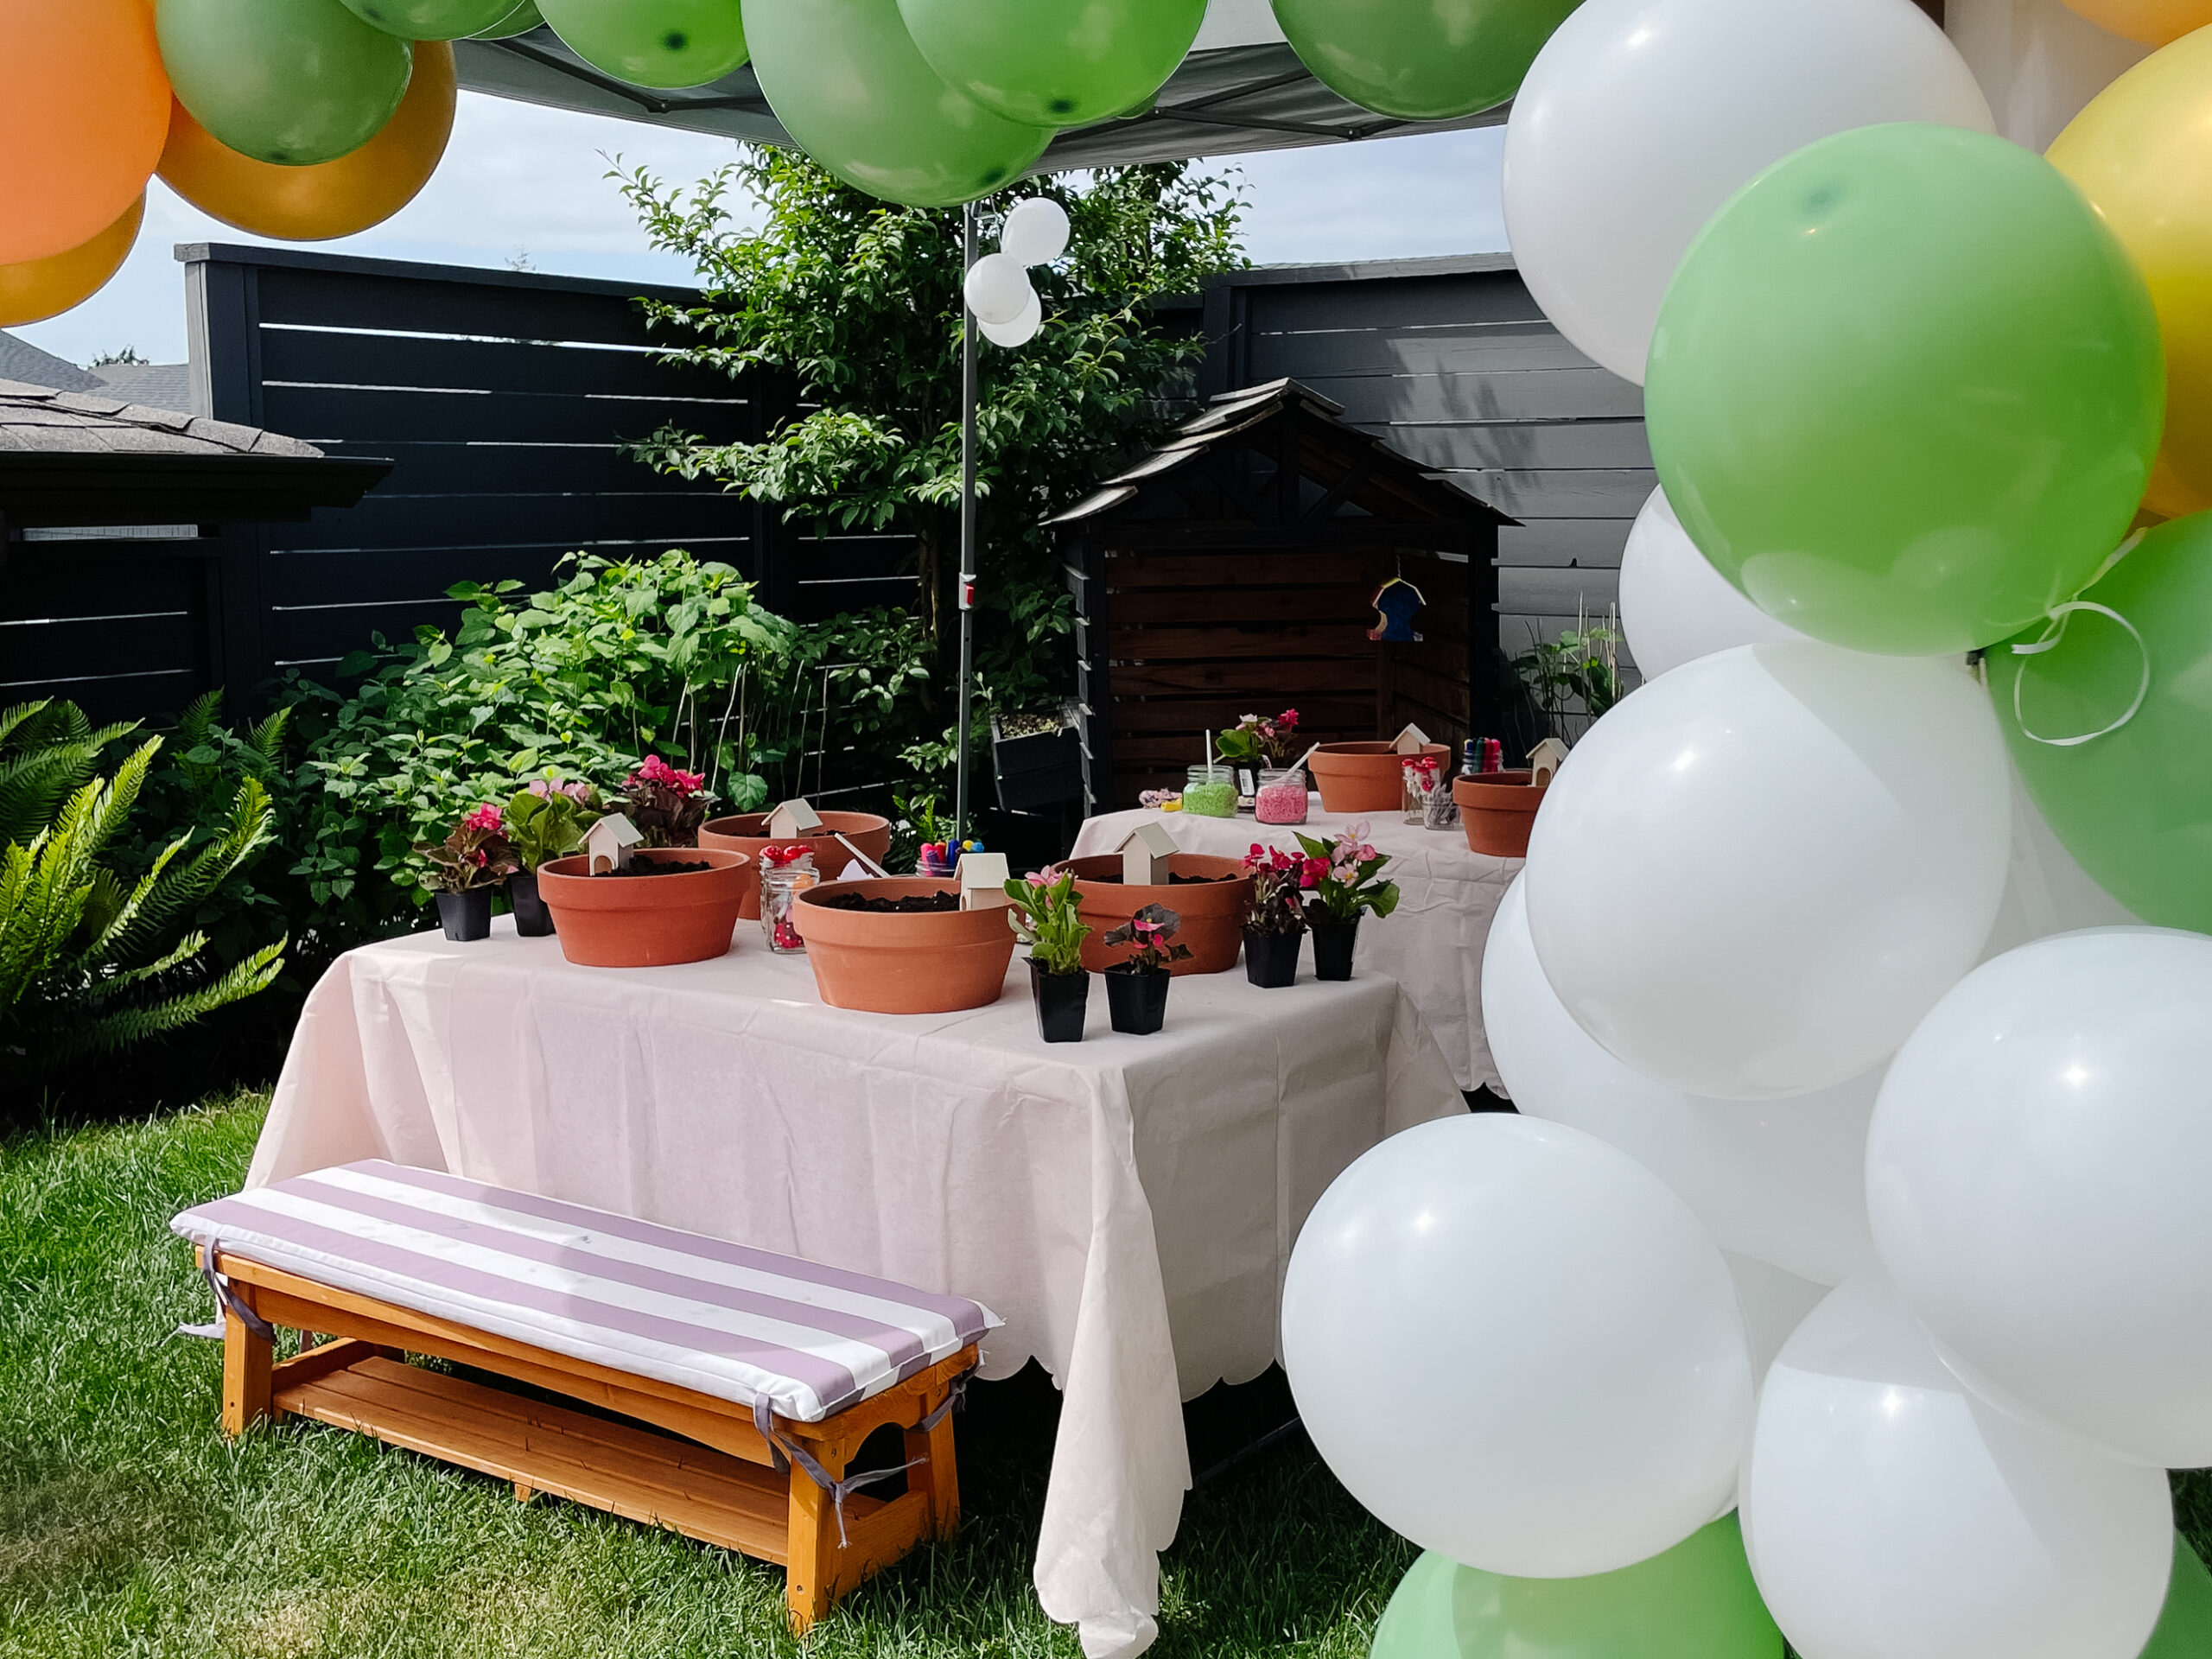 a fairy garden birthday party set up with balloons, picnic tables and chairs, and fair gardens to make